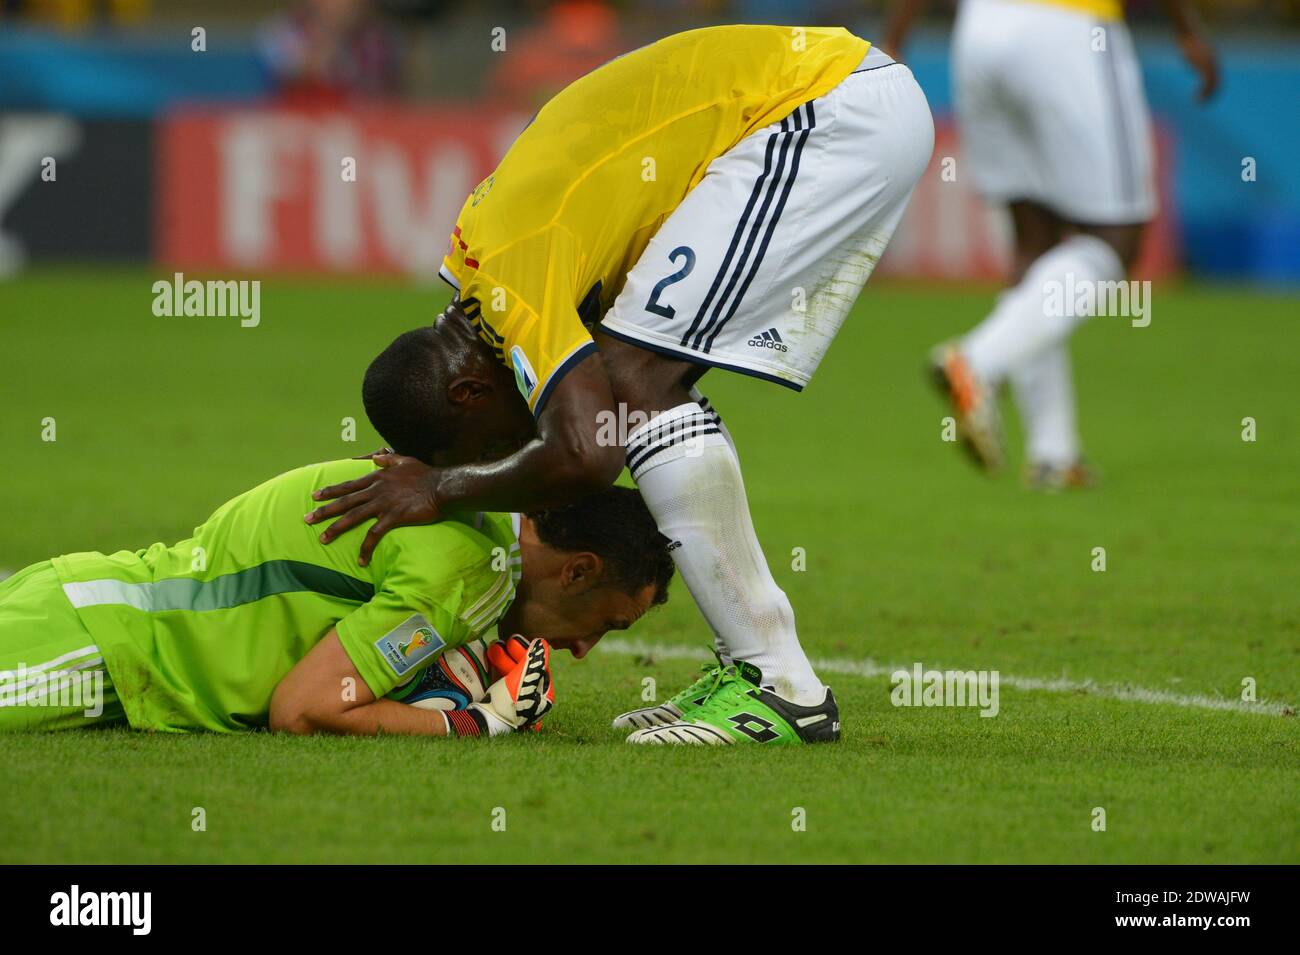 Colombia's David Ospina and Cristian Zapata during Soccer World Cup 2014 1/8 of final round match Colombia v Uruguay at Maracana Stadium, Rio de Janeiro, Brazil on June 28, 2014. Colombia won 2-0. Photo by Henri Szwarc/ABACAPRESS.COM Stock Photo